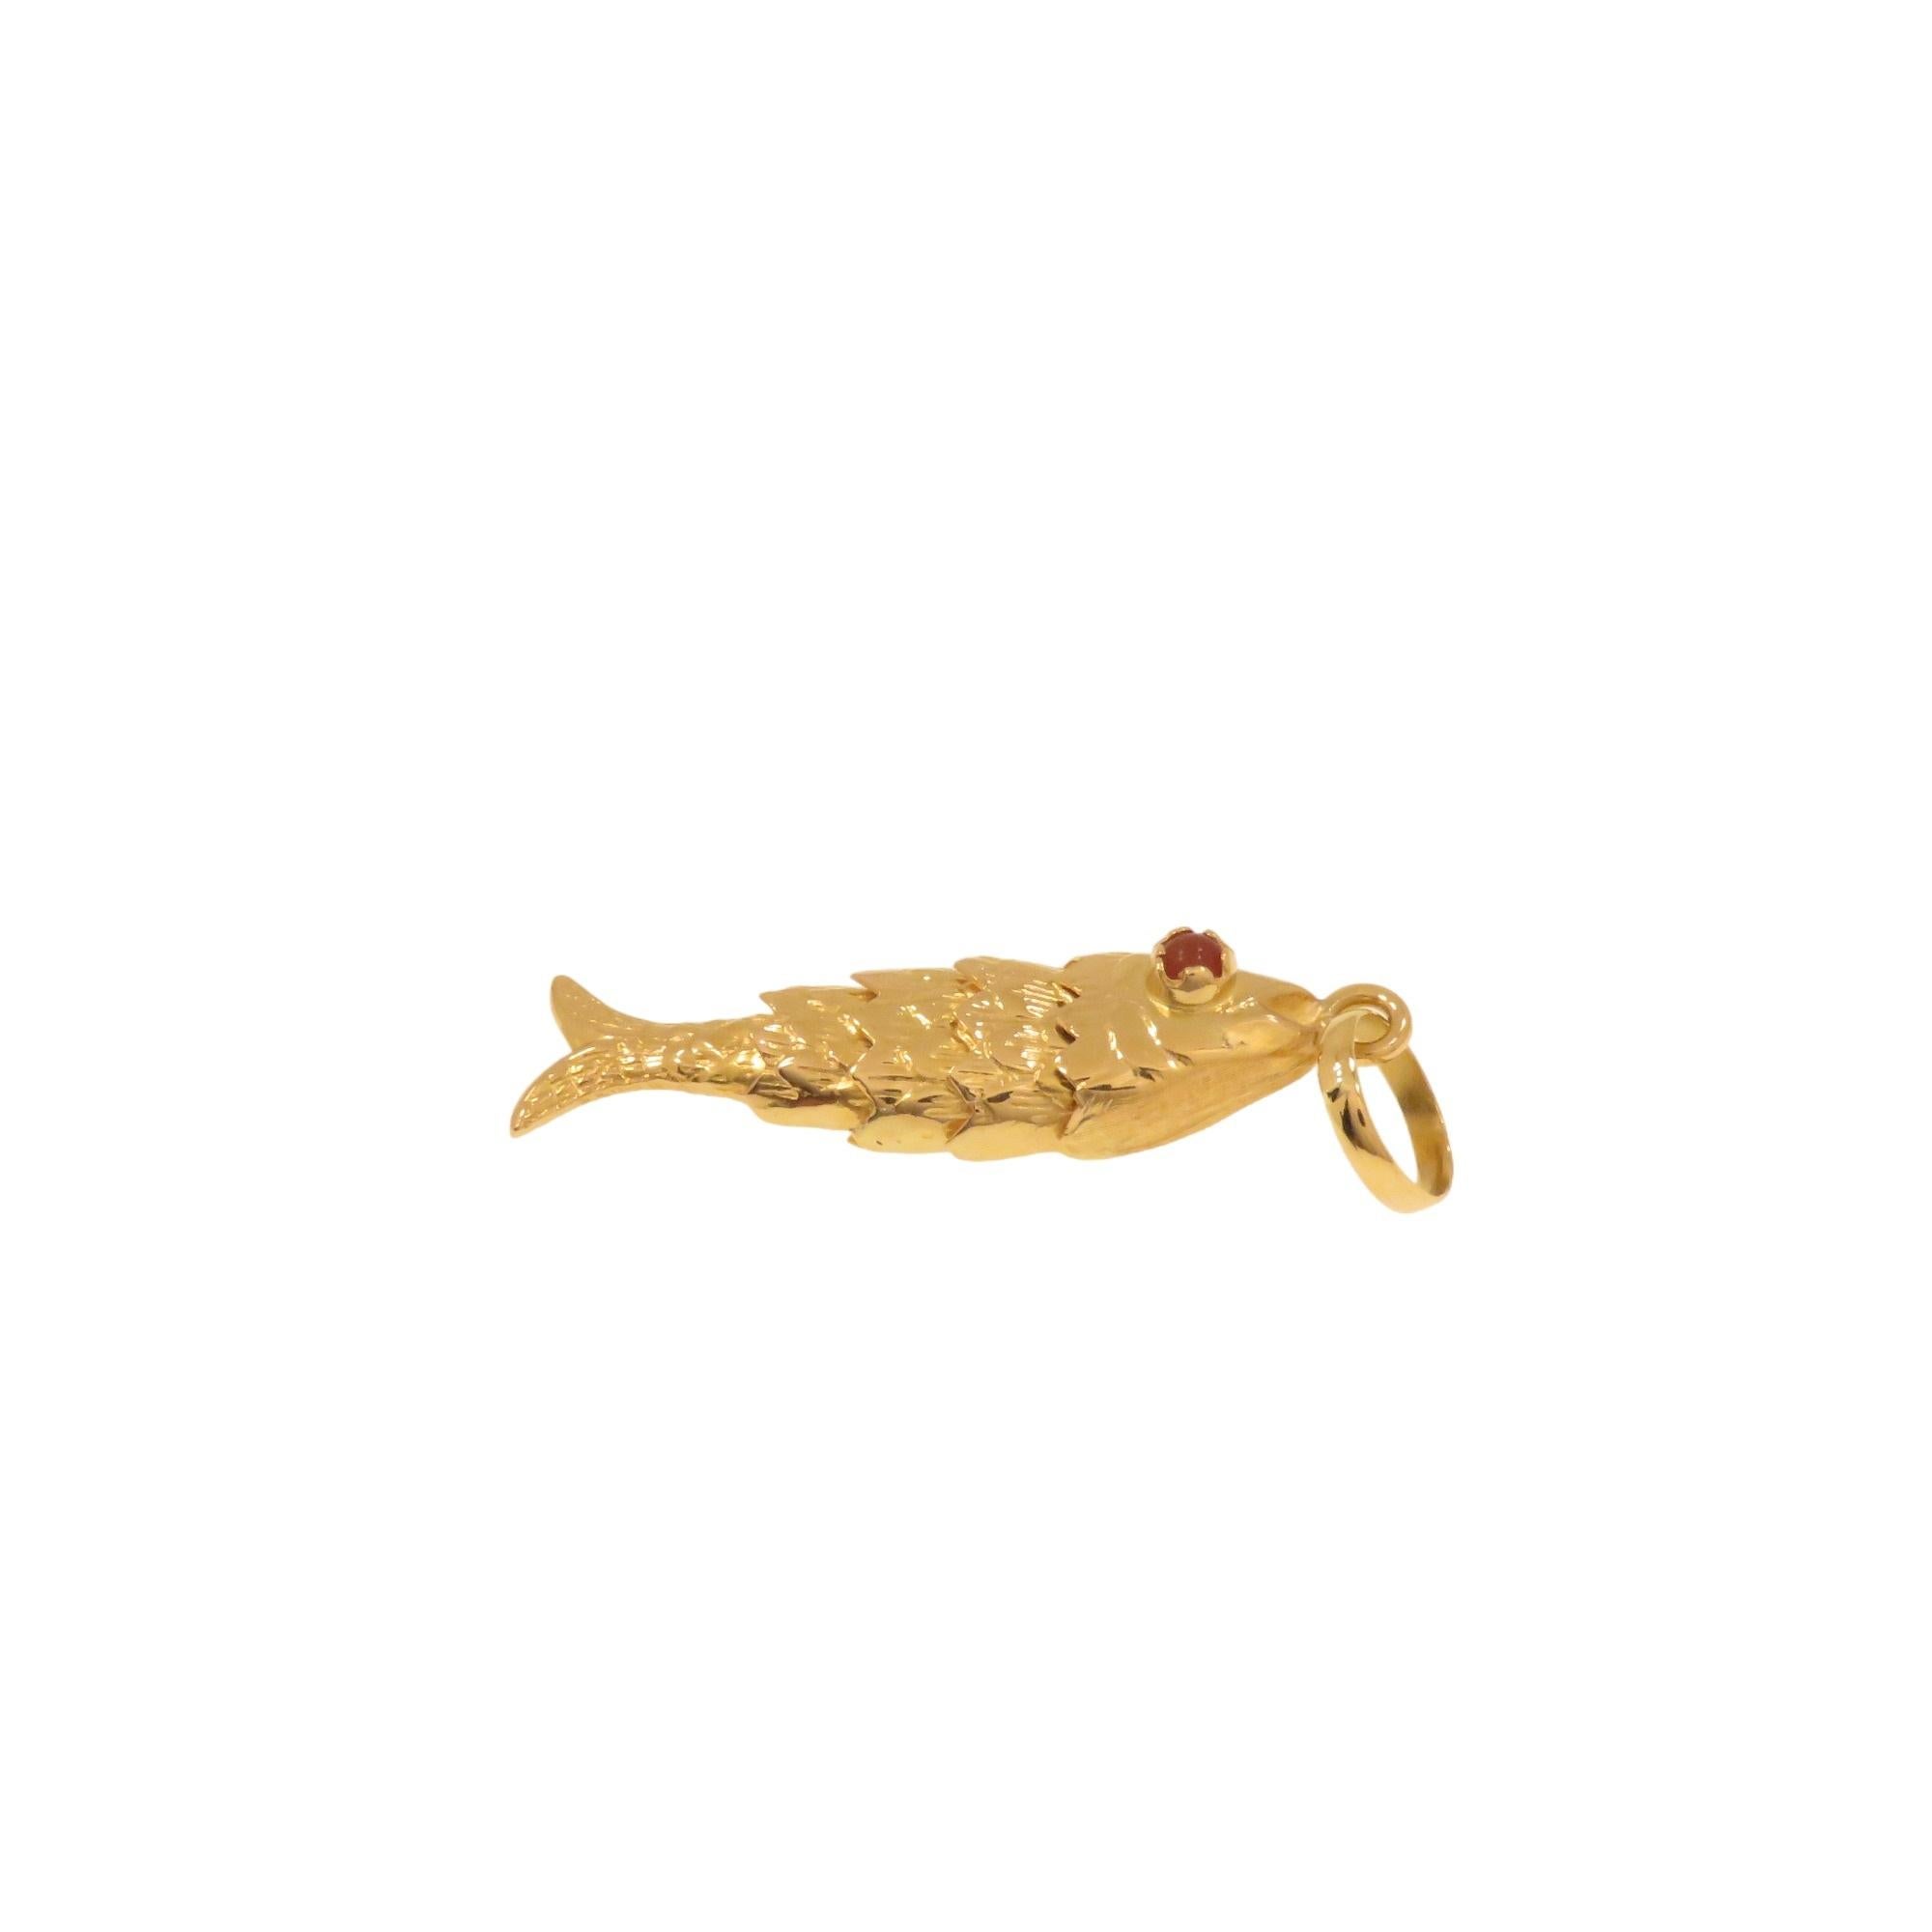 Stunning fish-shaped pendant handmade in Italy between 1960 and 1970. It features a realistic fish with an articulated body that allows it to imitate the natural aquatic movements of a fish. The body is 18-karat yellow gold, and the eyes are adorned